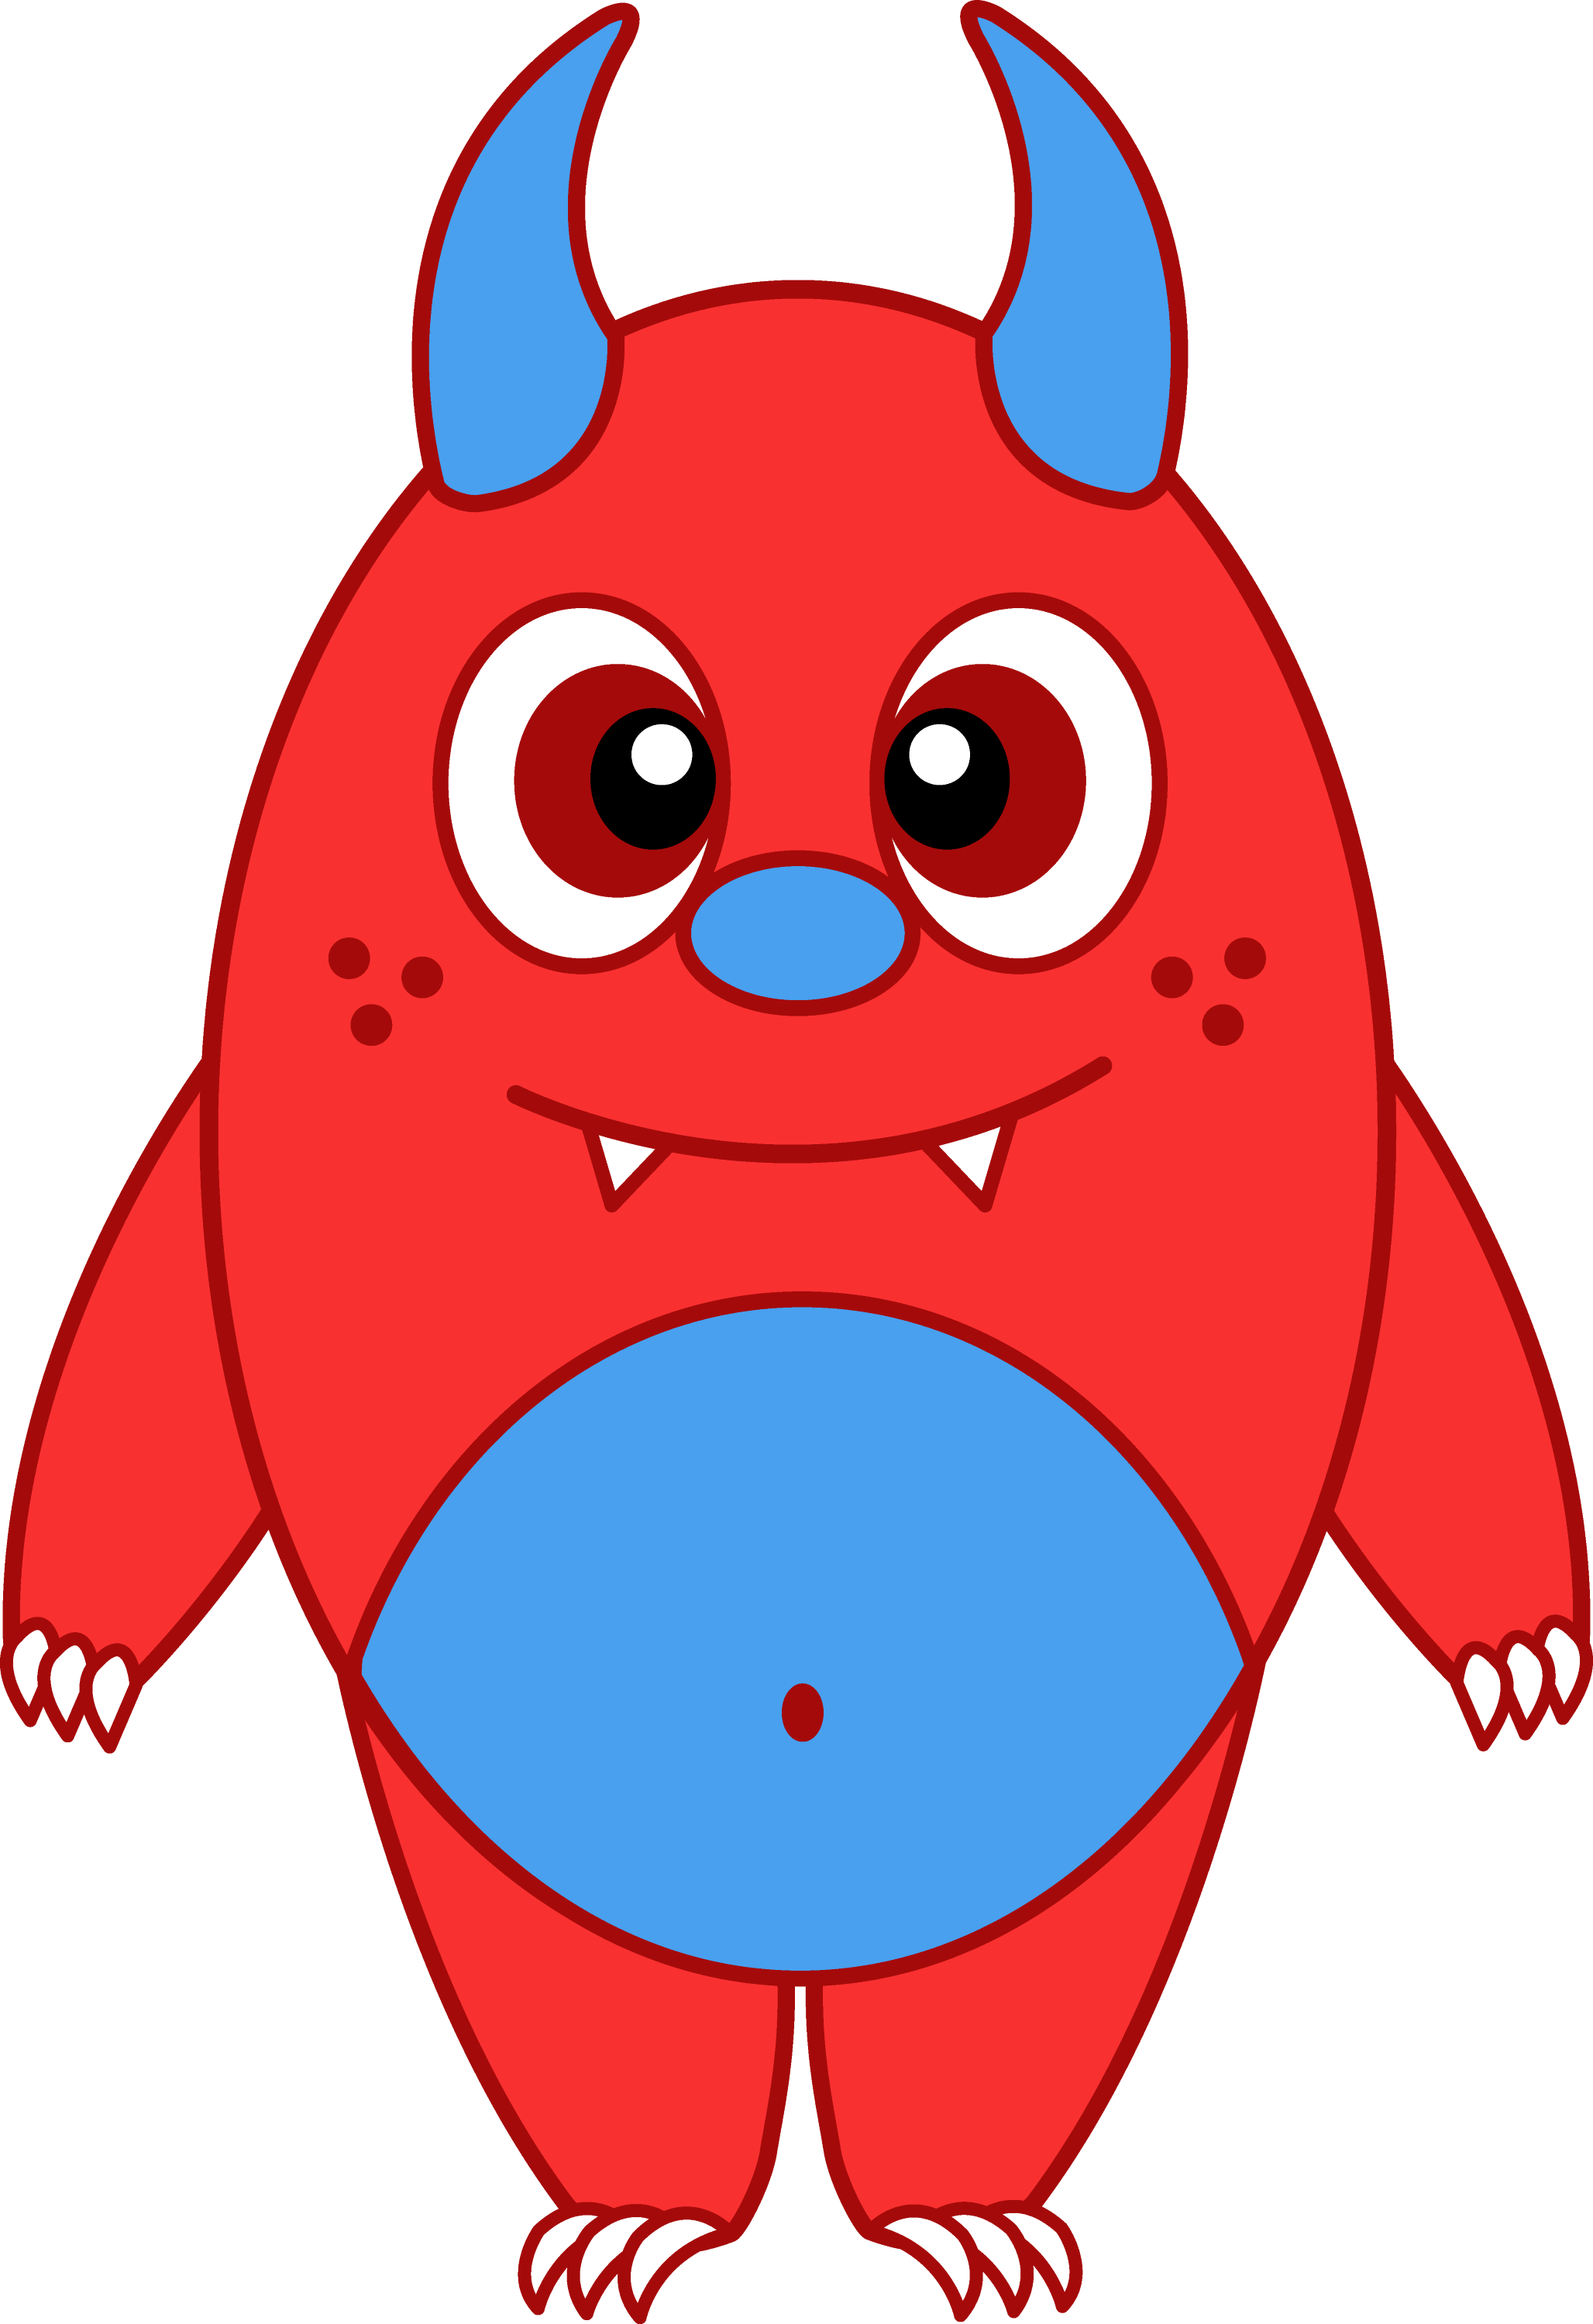 Silly Little Red Monster - Free Clip Art